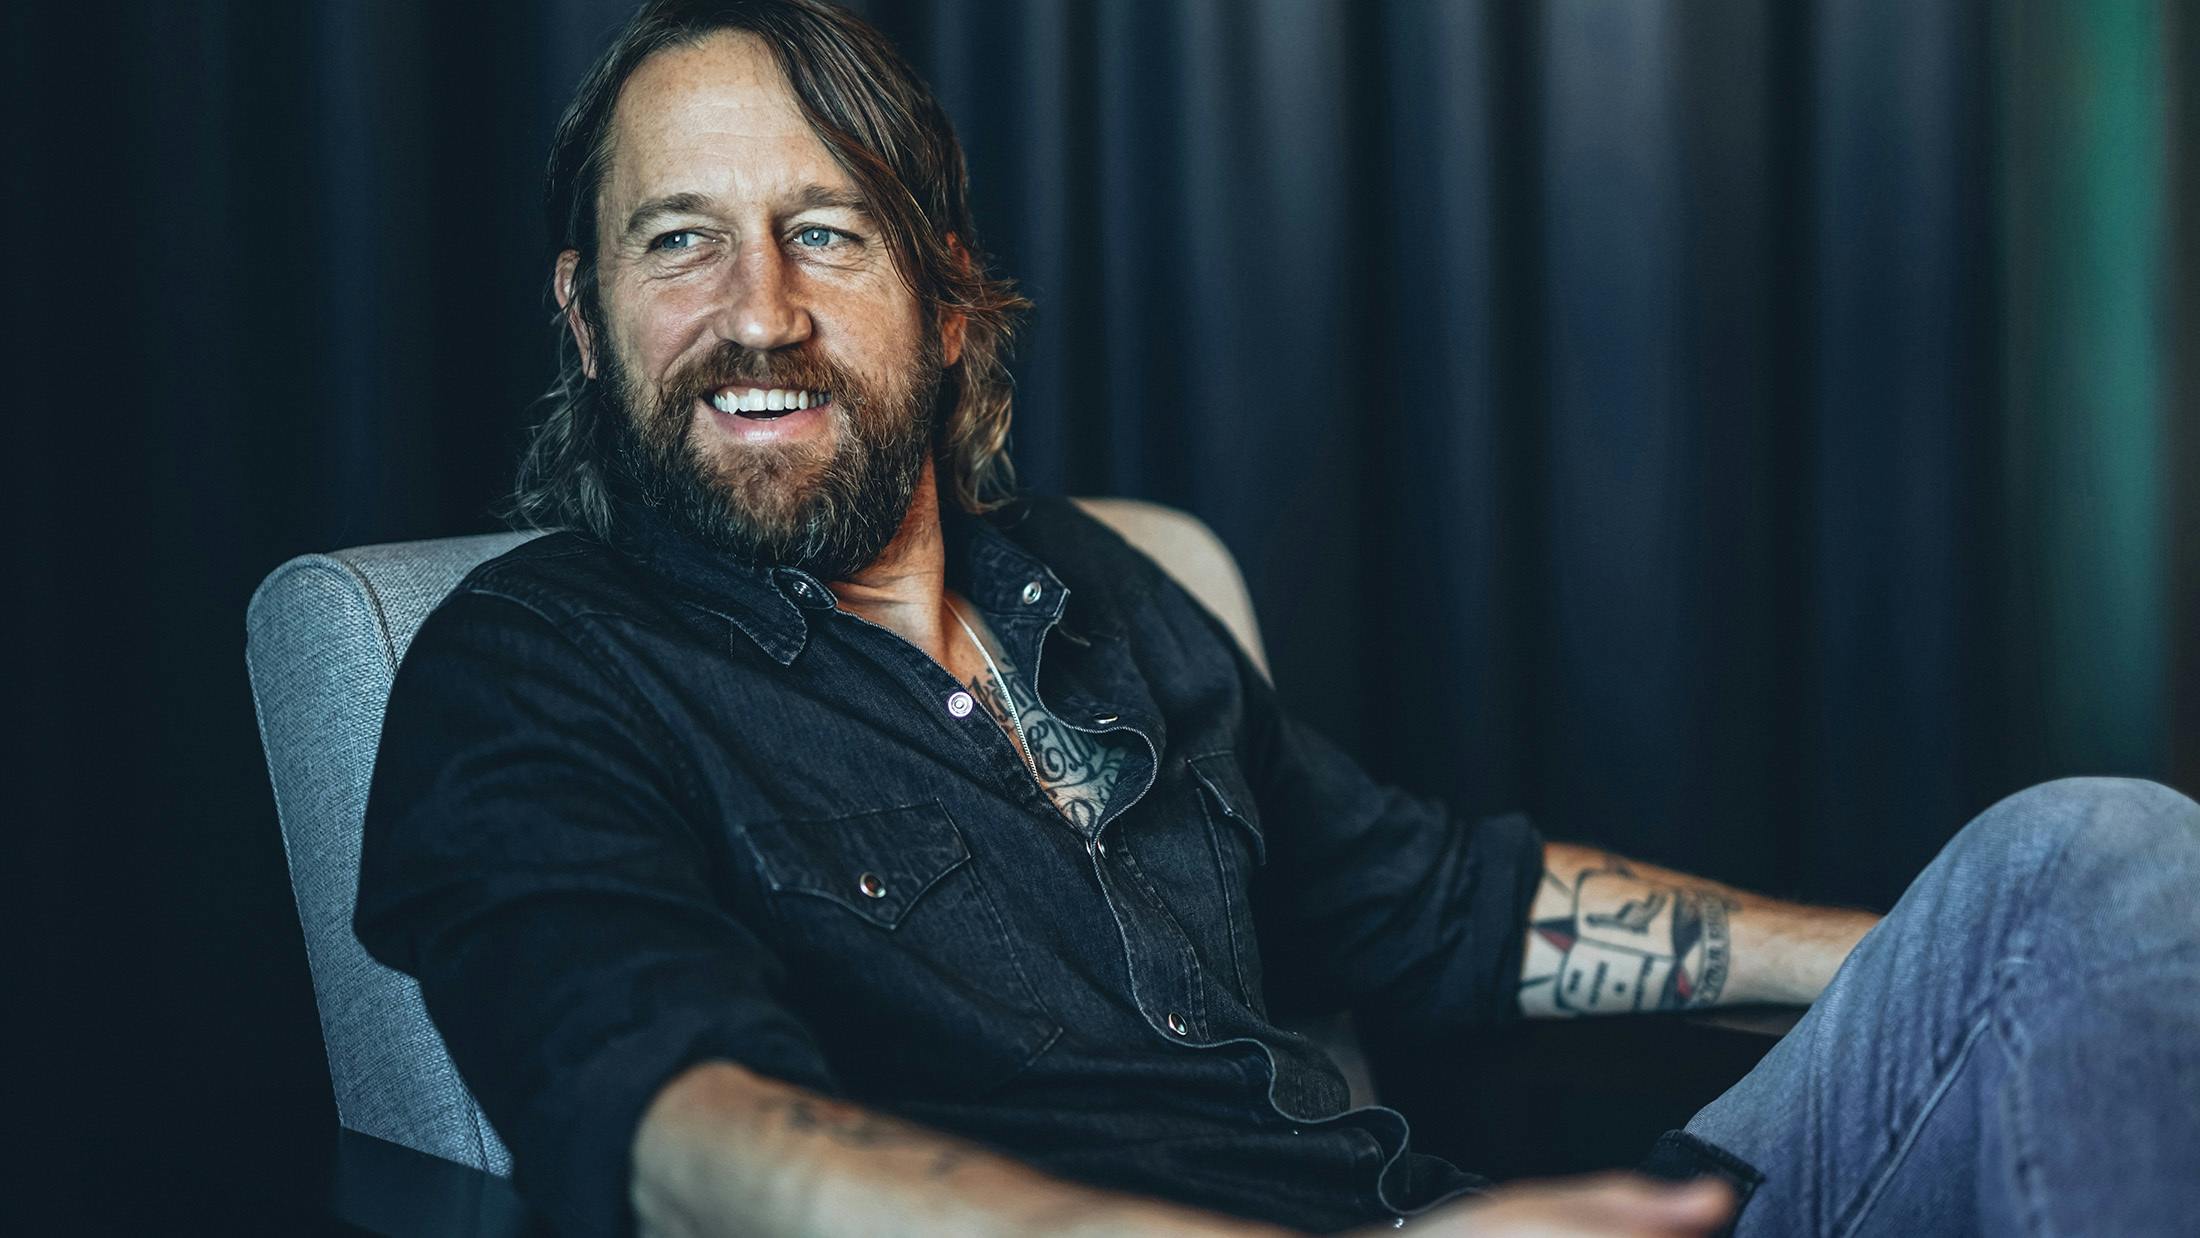 Foo Fighters’ Chris Shiflett: The 10 songs that changed my life